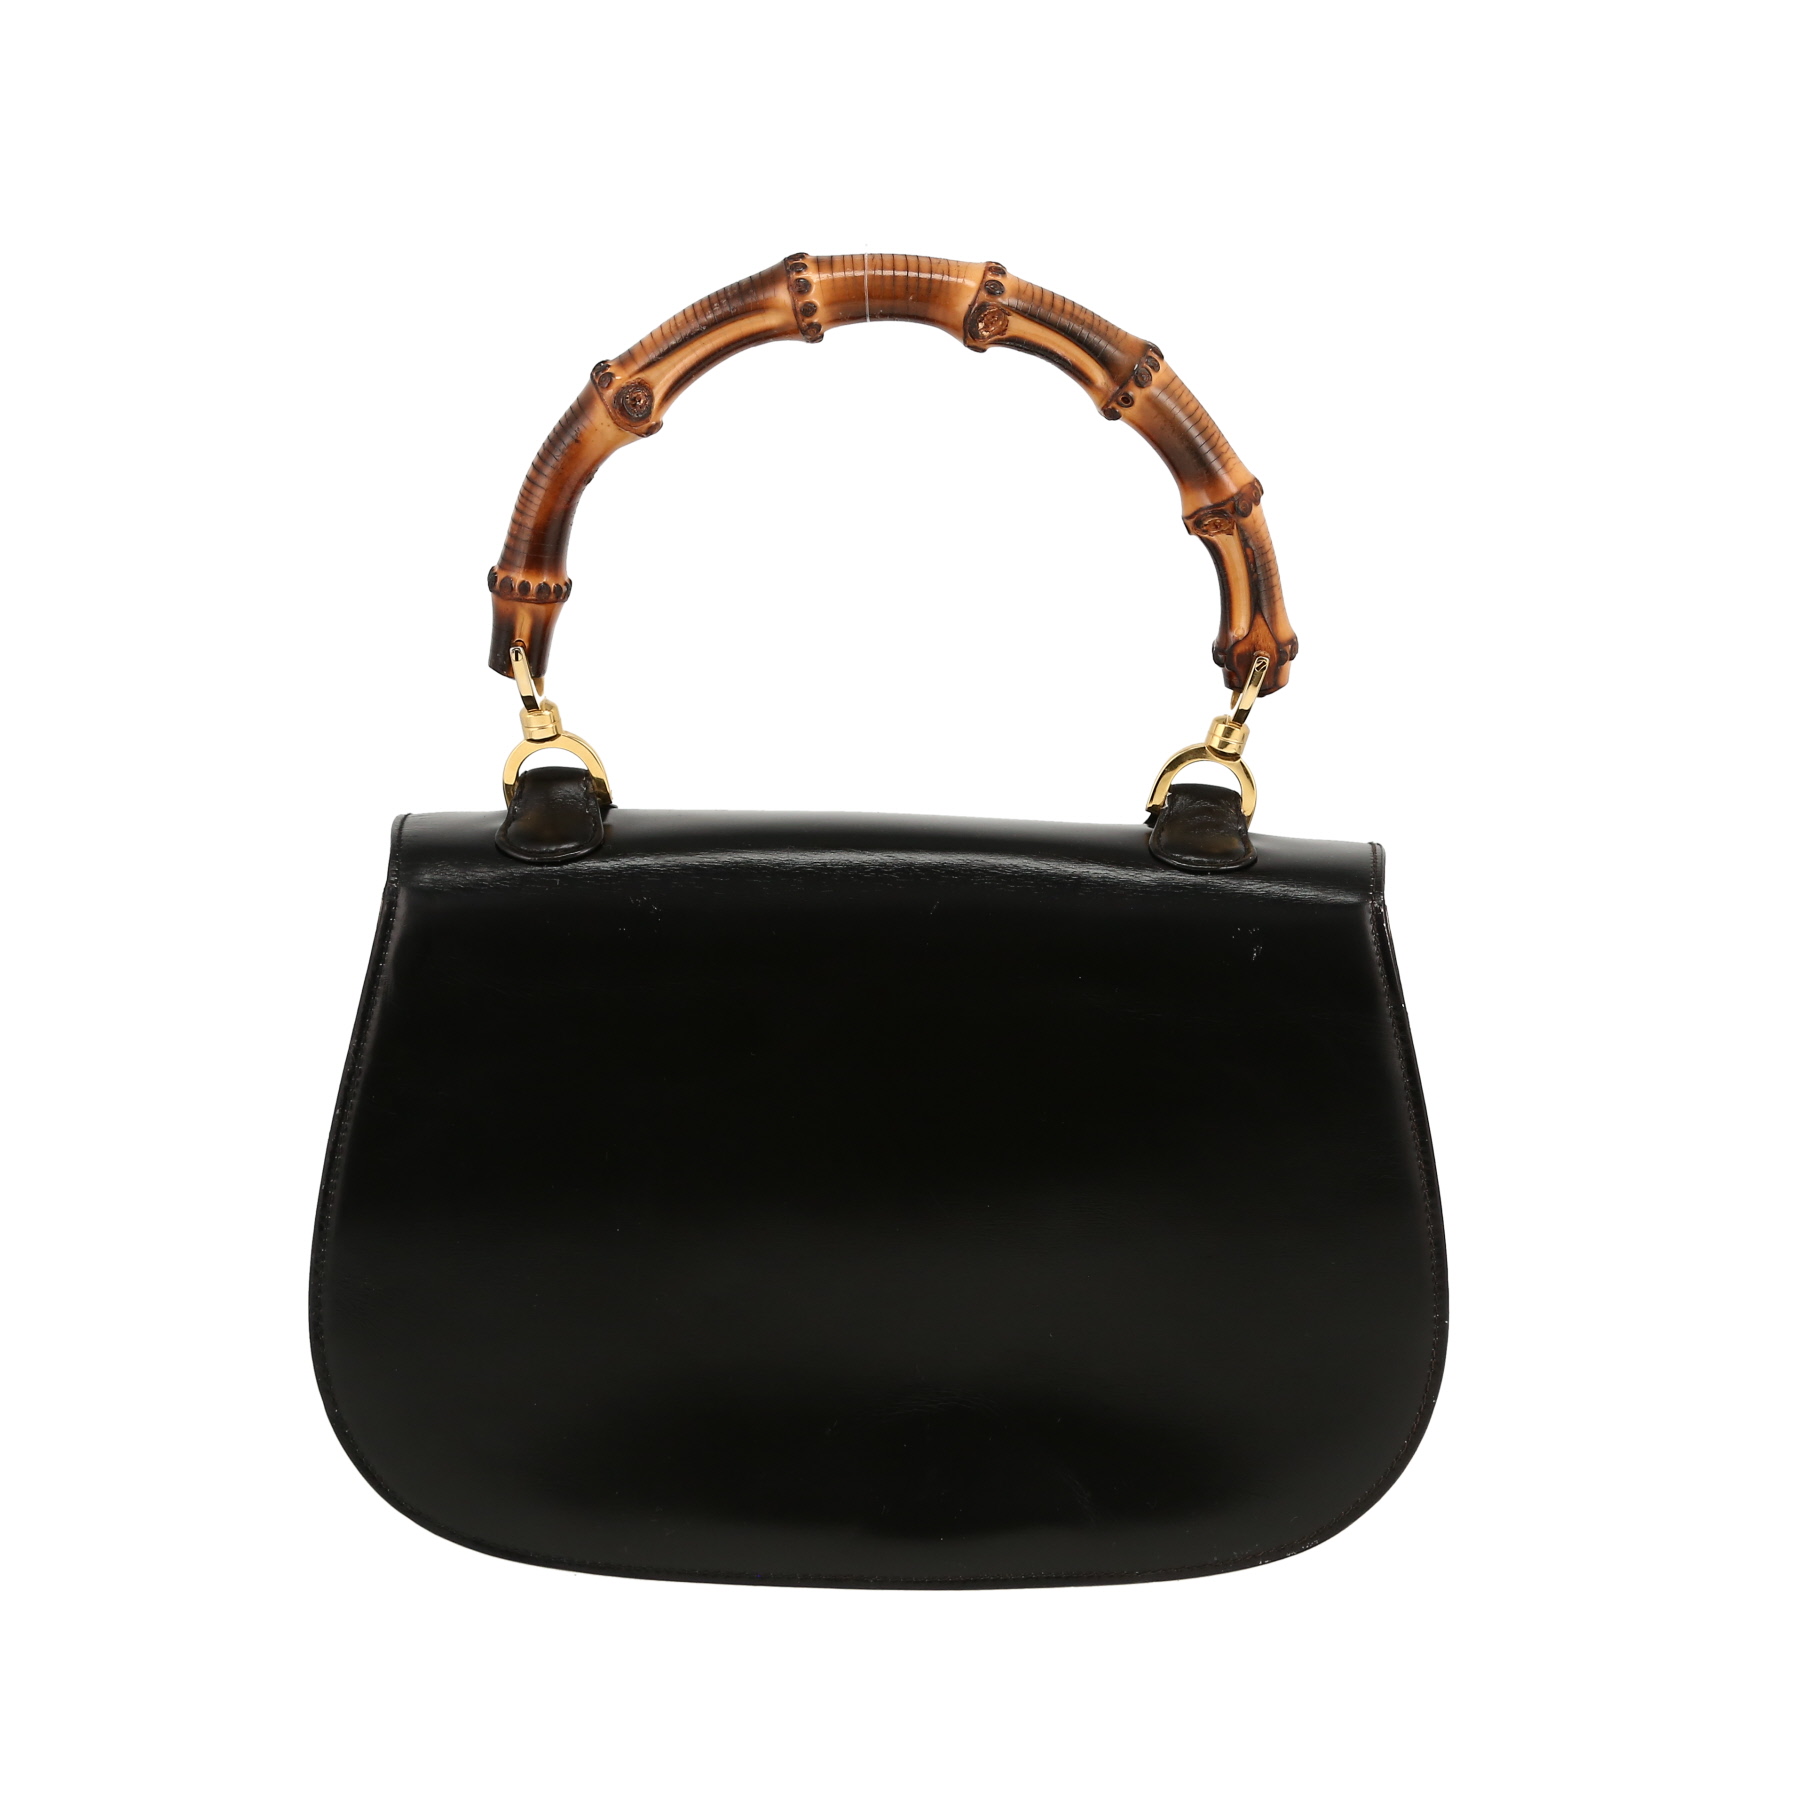 Bamboo Shoulder Bag In Black Leather And Bamboo